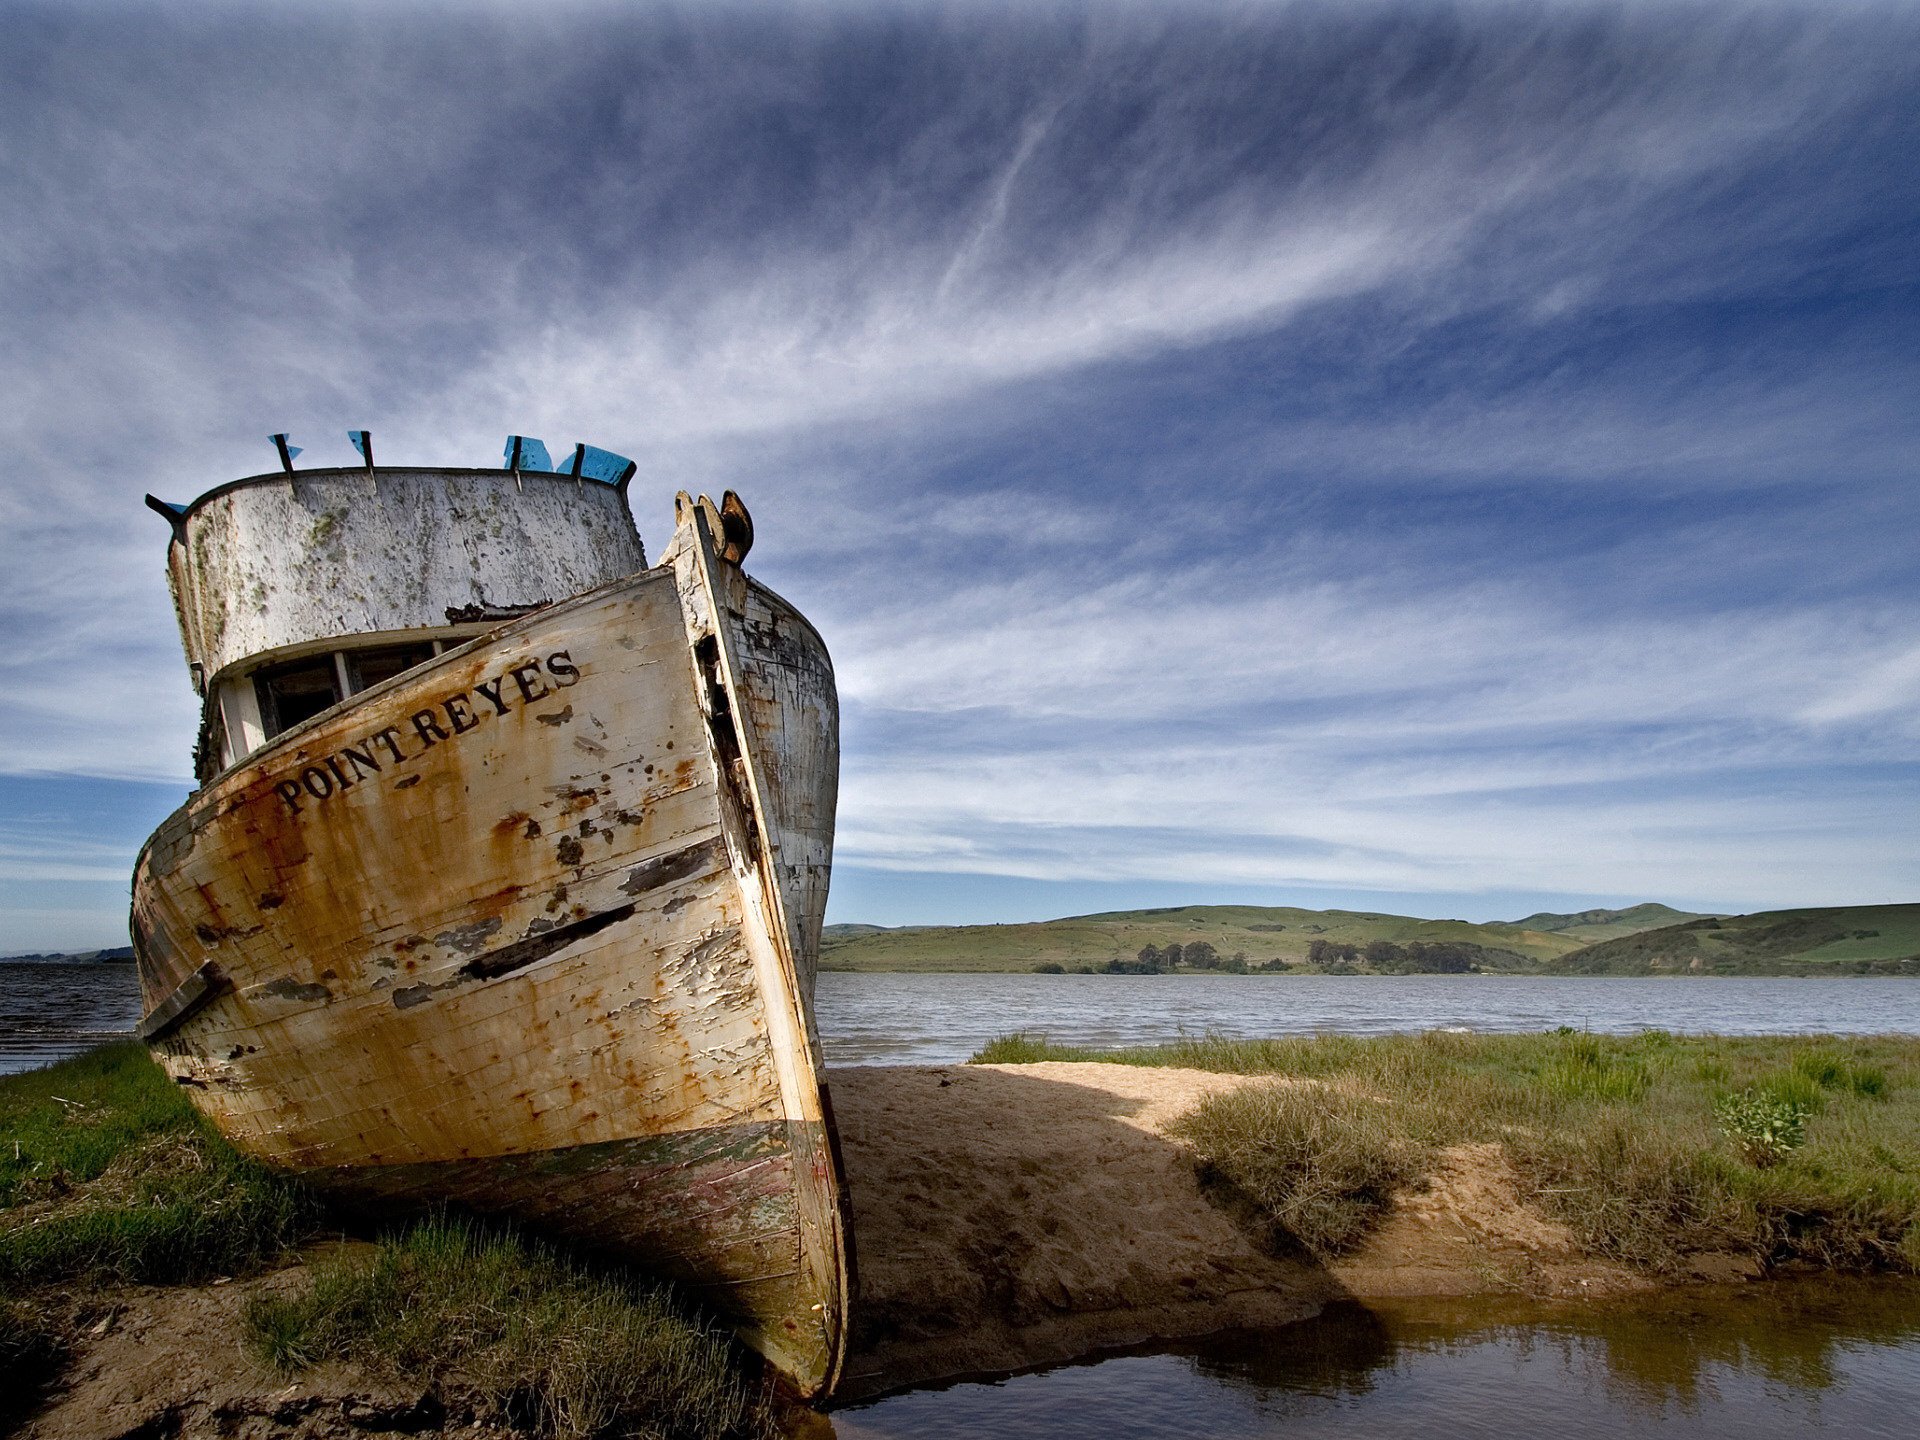 An old ship on the shore under a blue sky